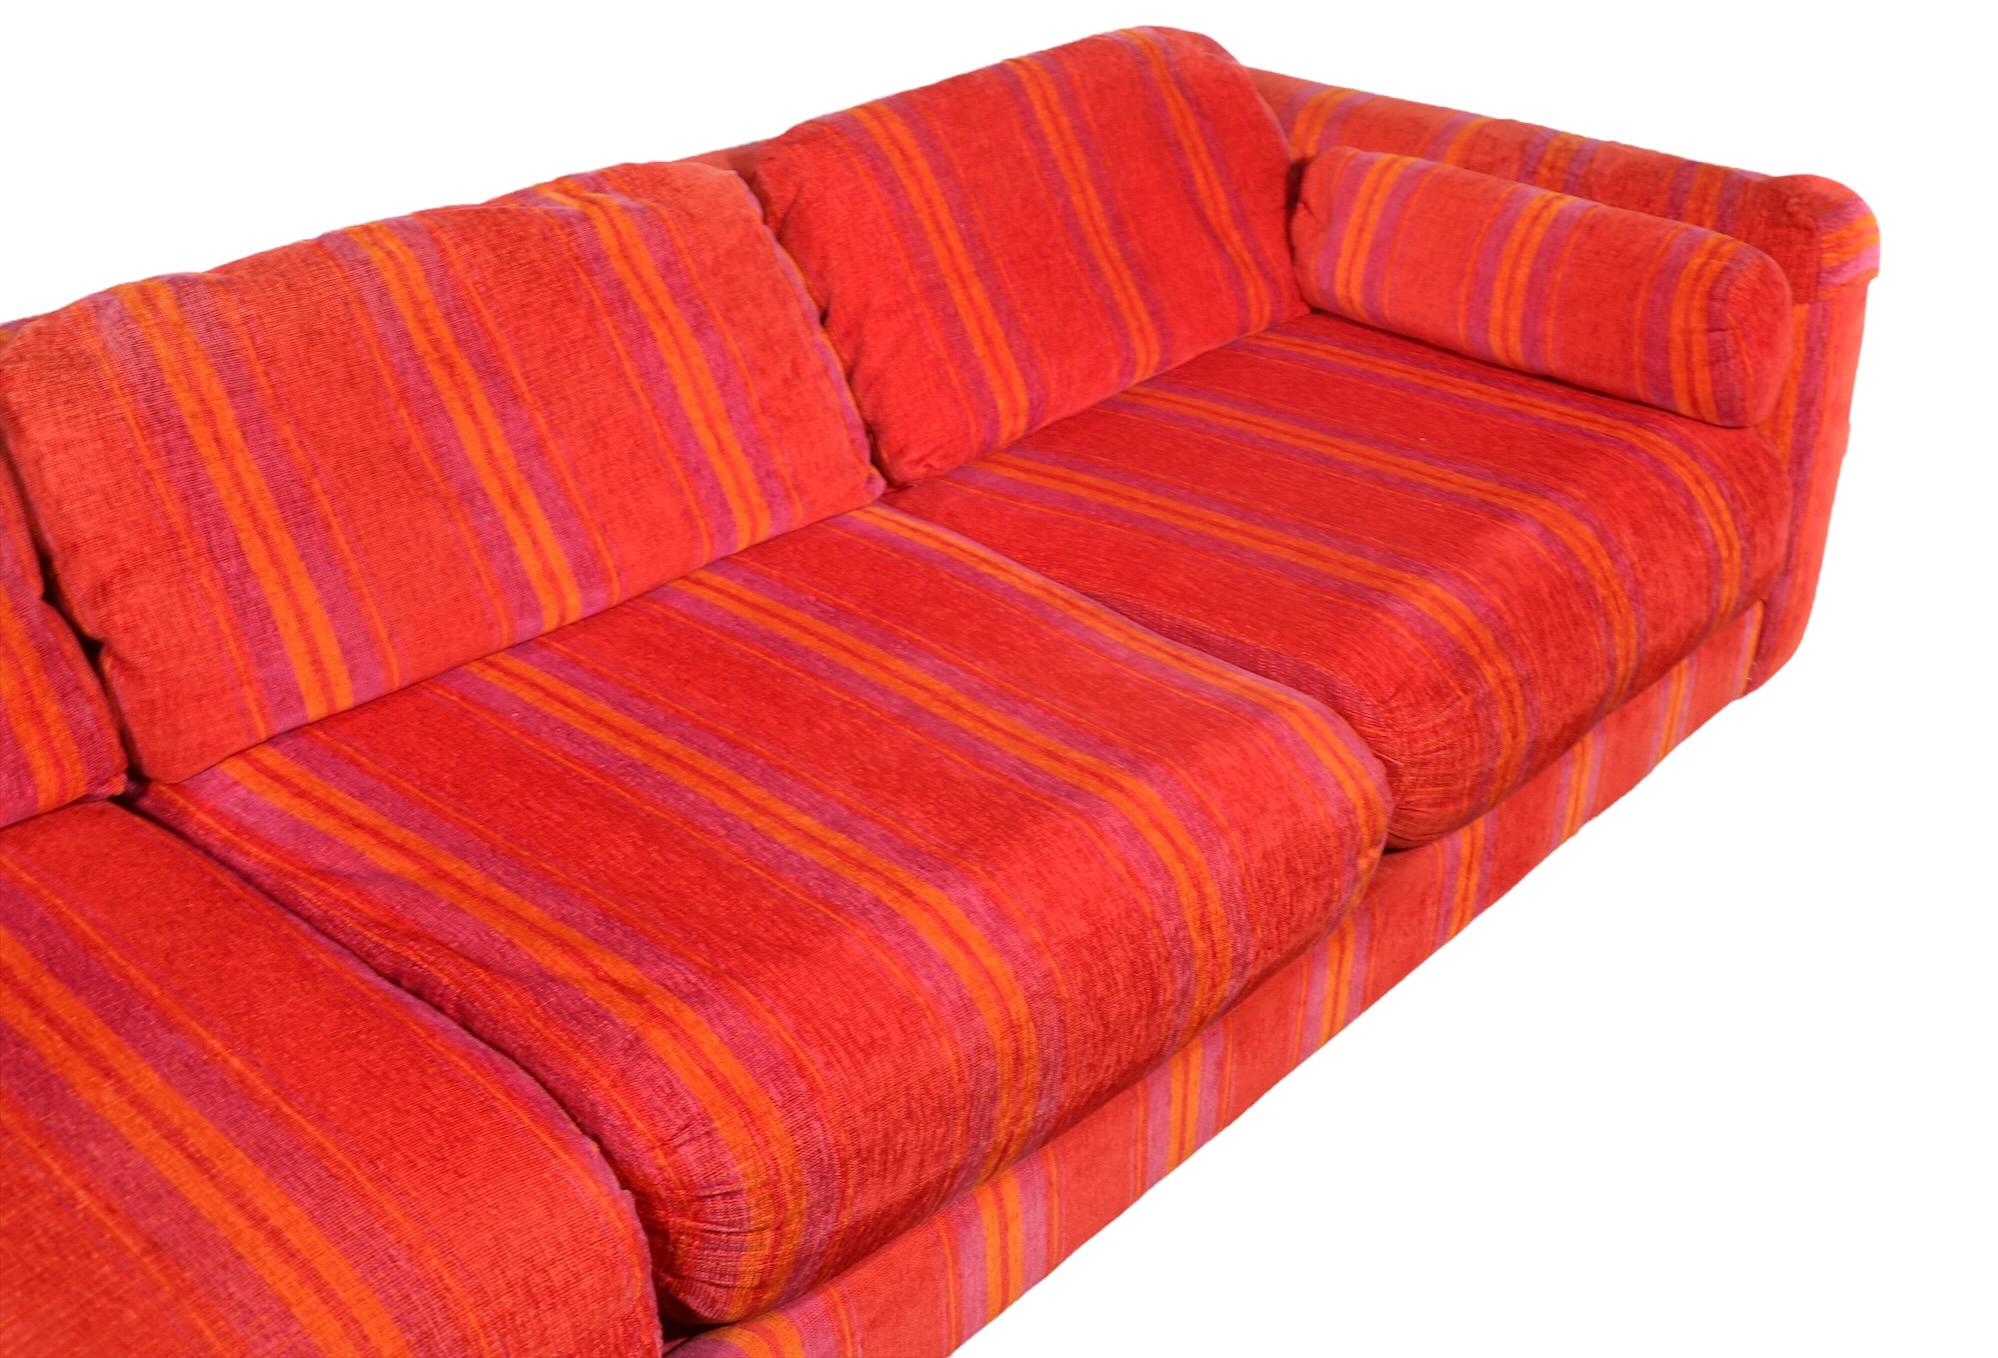 Chic 1970’s box sofa by Selig having polychrome stripped fabric upholstery, probably by Jack Lenor Larsen, on cylindrical chrome legs. Comfortable to sit, lounge, or even lay down on, this well crafted piece exhibits the casual modernist style